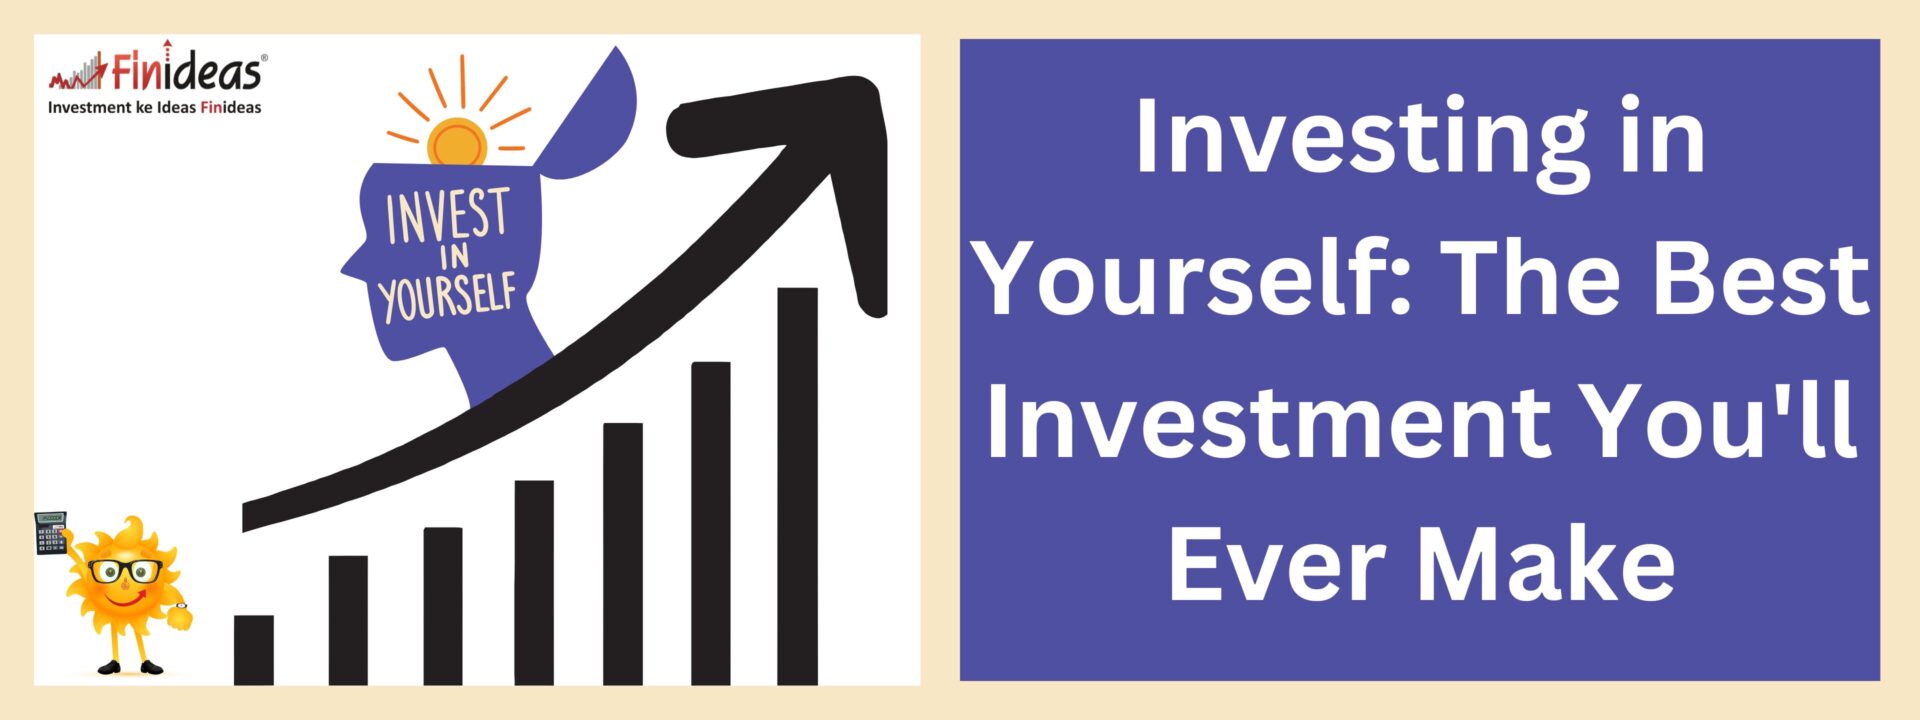 Investing in Yourself The Best Investment You'll Ever Make